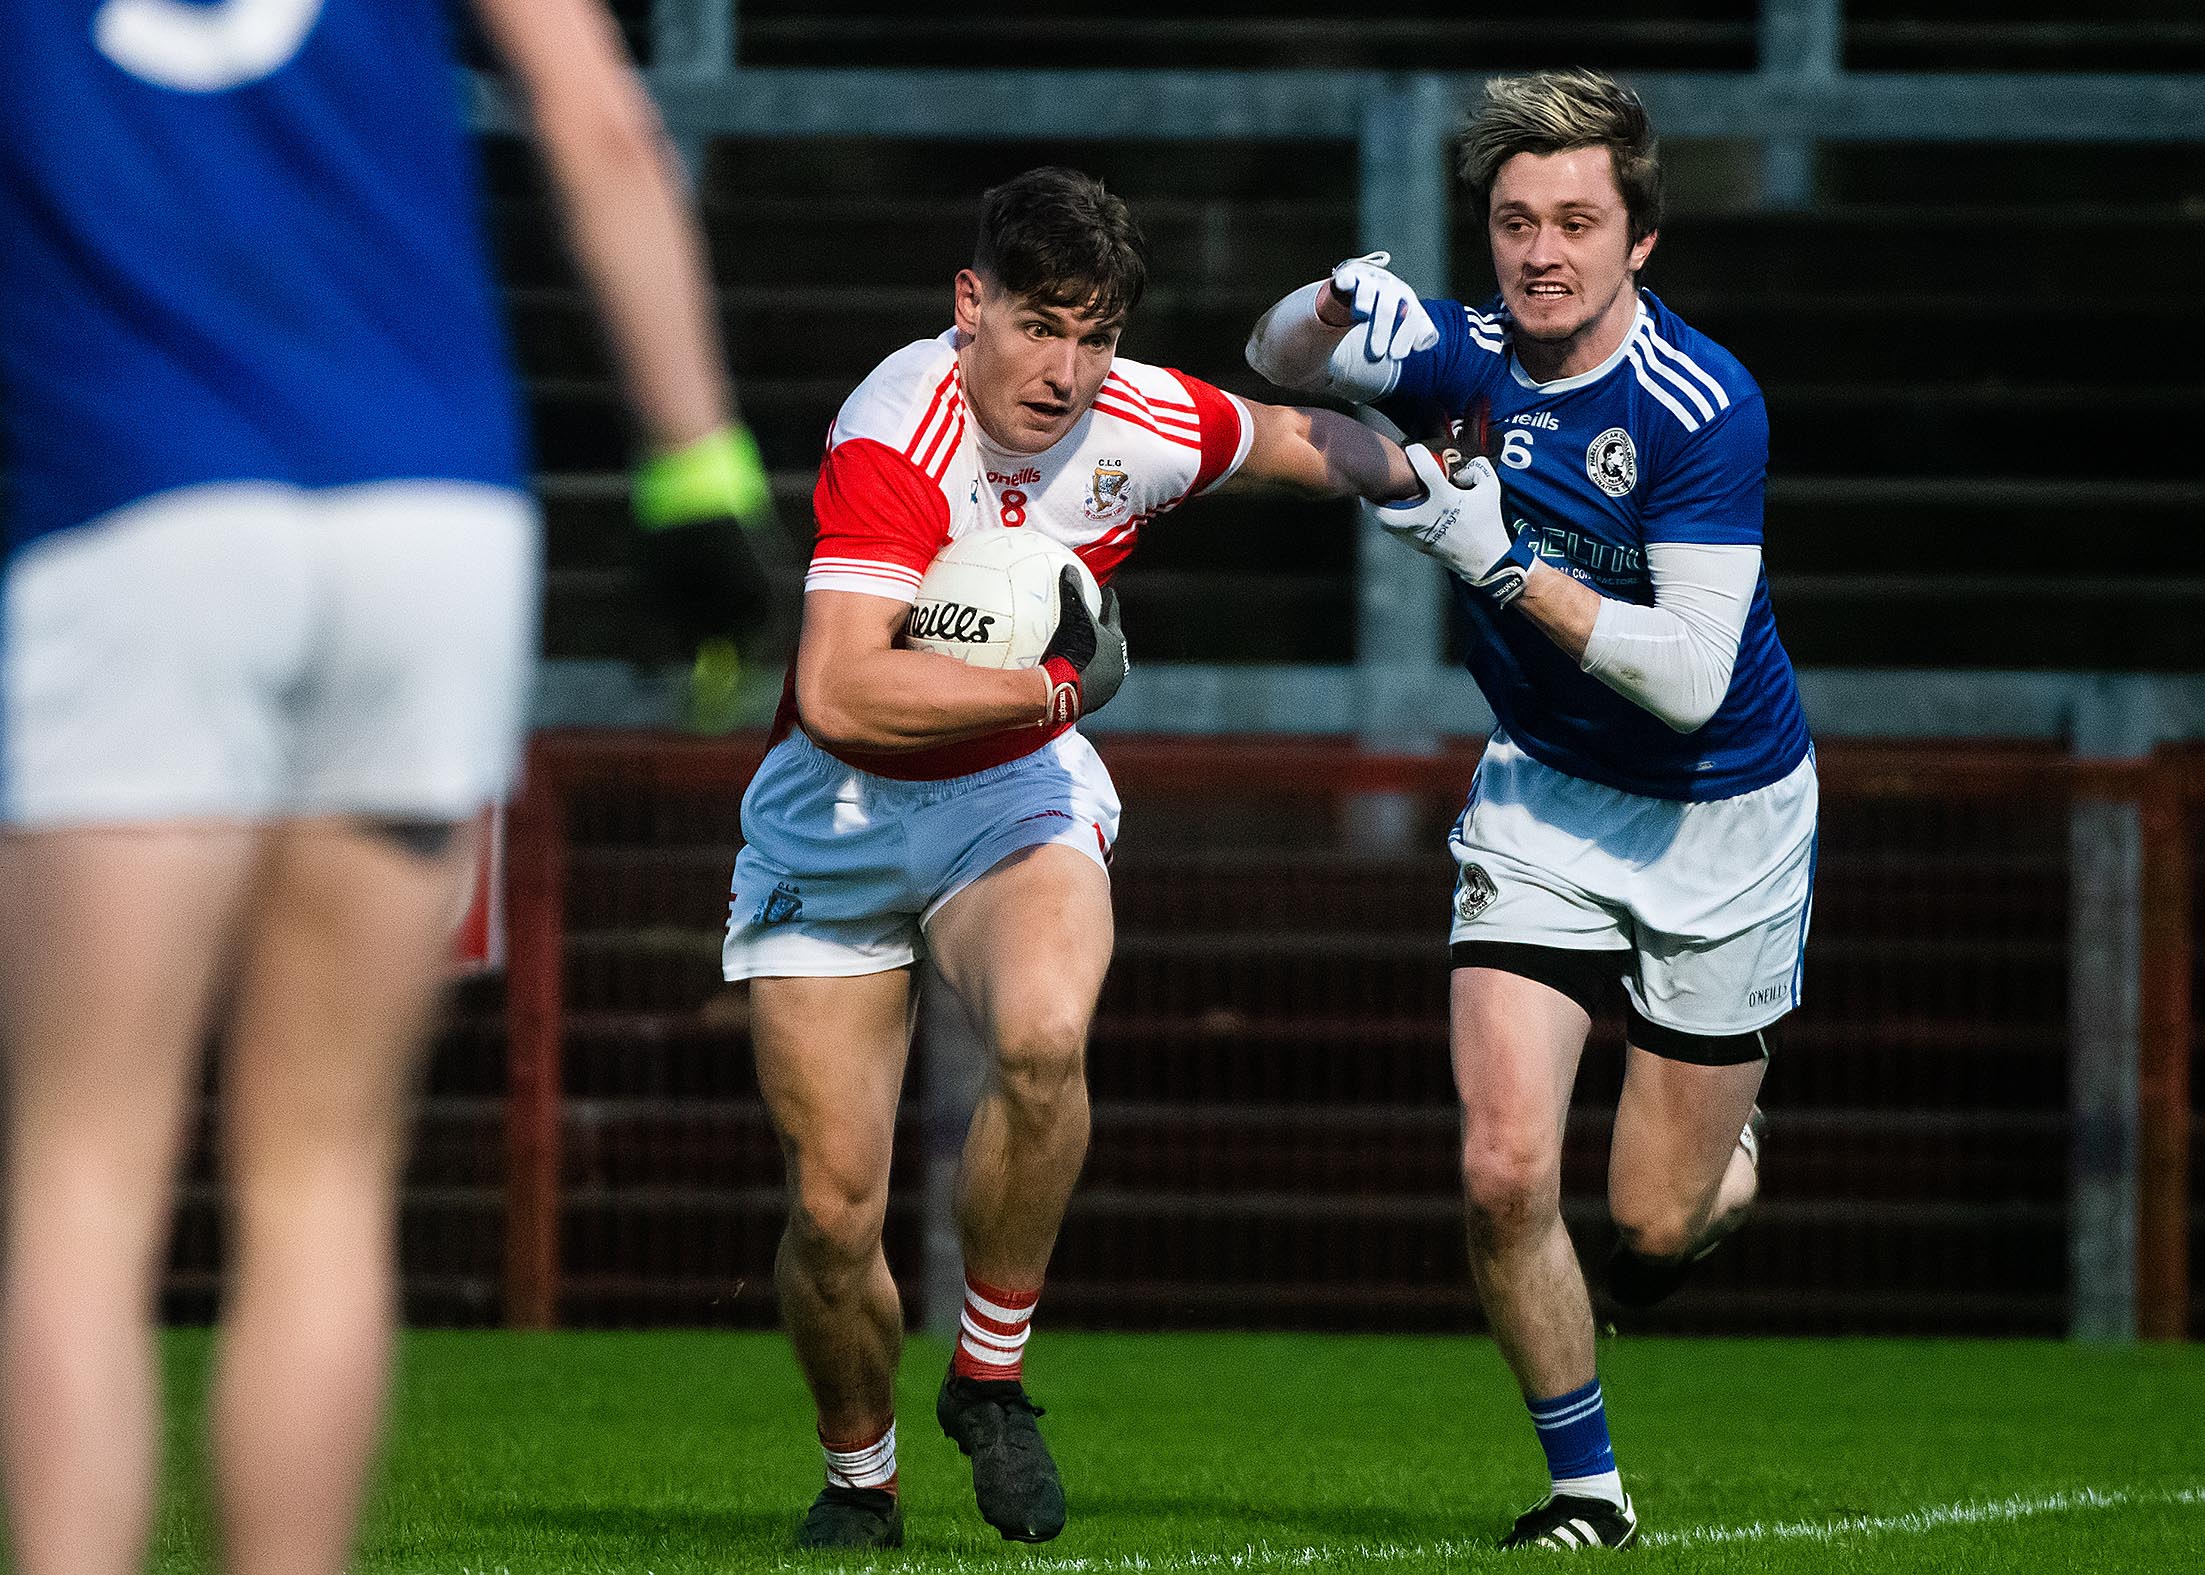 Galbally skipper relishes another Ulster Final shot